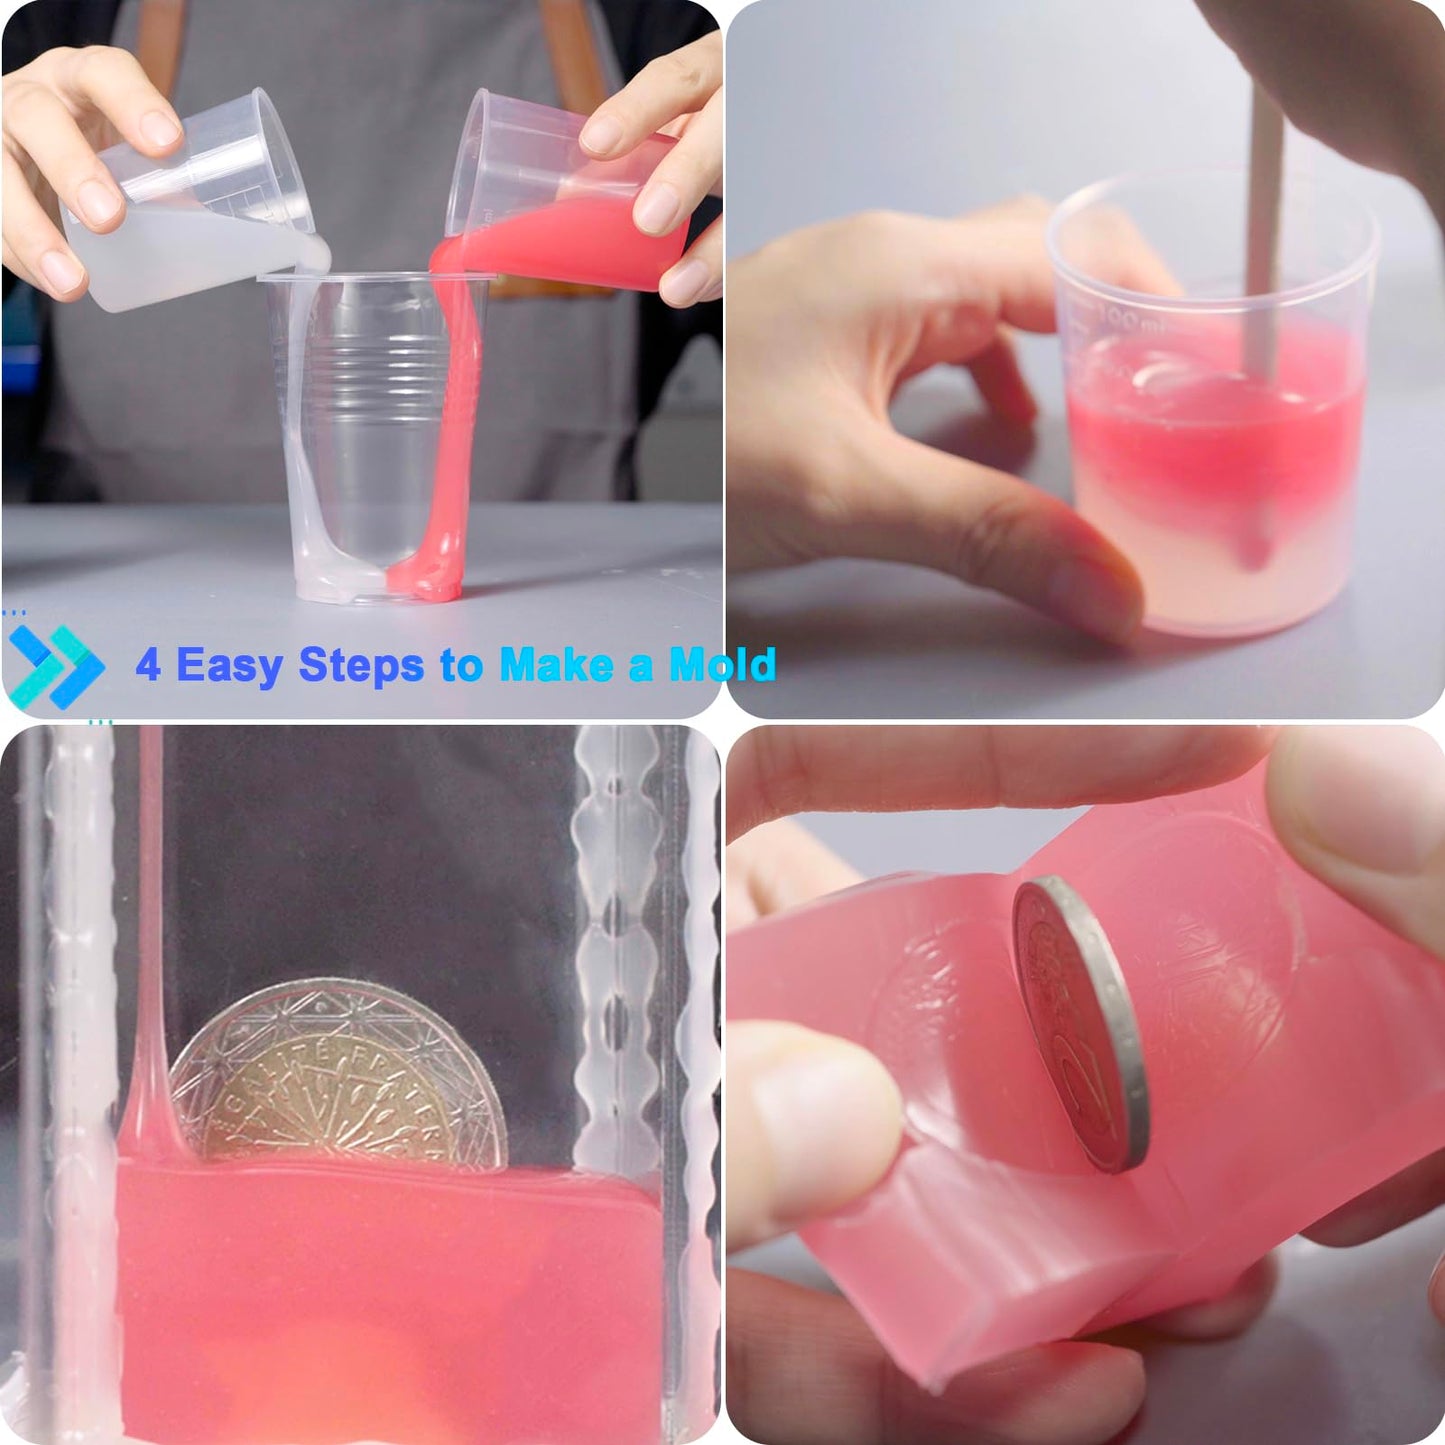 BBDINO Silicone Mold Making Kit 20A, Mold Making Silicone Translucent, Liquid Silicone for Mold Making 1:1 by Volume, Ideal for Casting Resin, Soap,